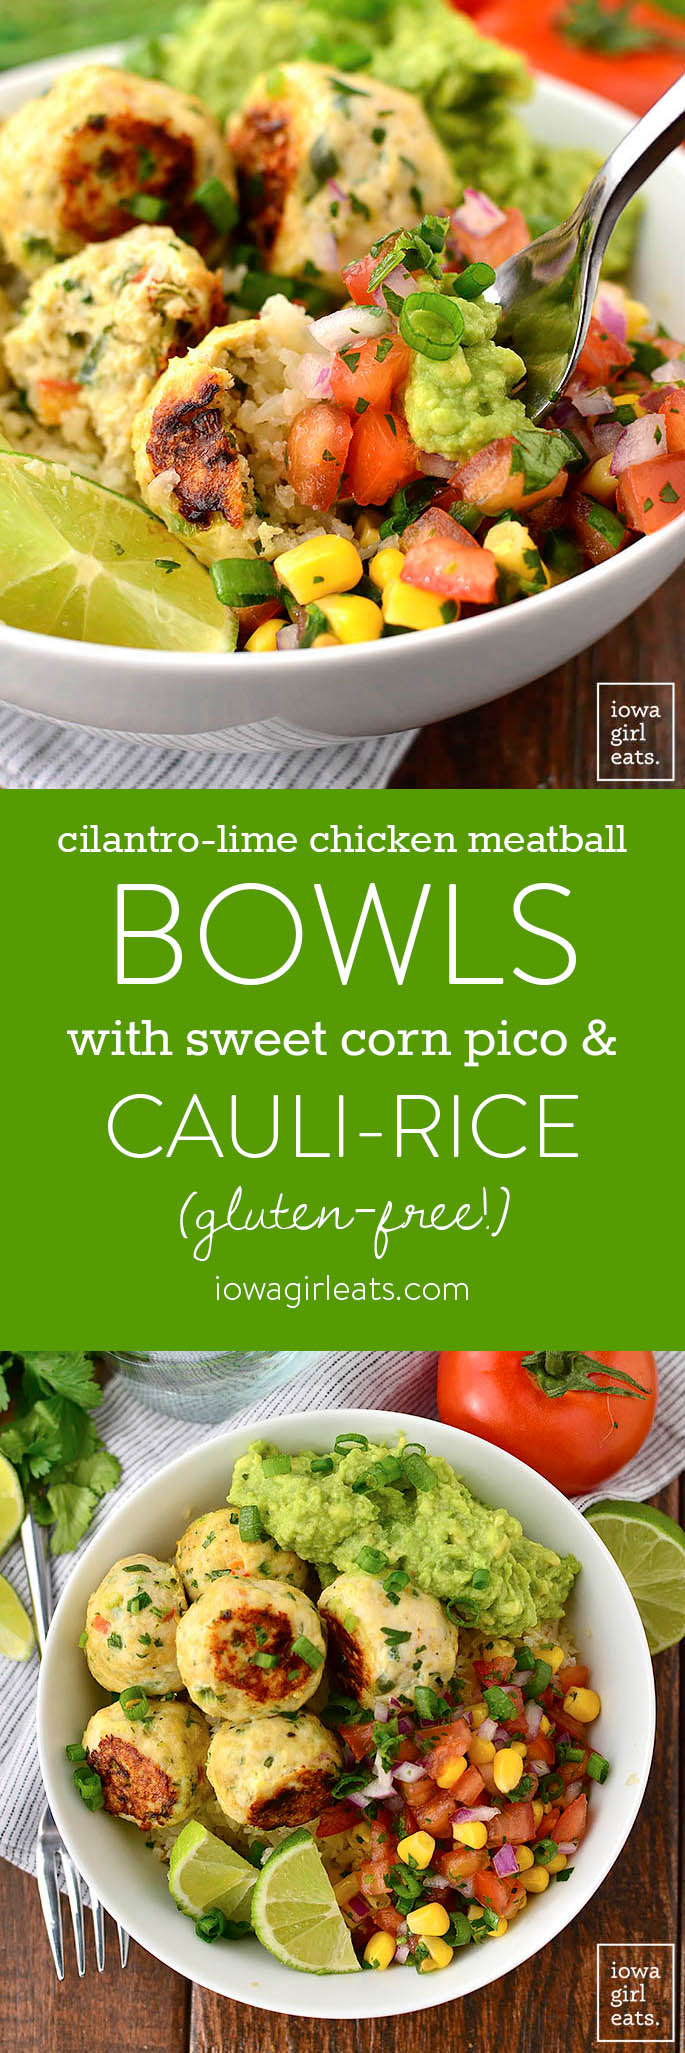 Cilantro-Lime Chicken Meatball Bowls with Sweet Corn Pico de Gallo and Cauli-Rice are a fresh and flavorful gluten-free lunch or dinner recipe. Prep once and enjoy all week long! | iowagirleats.com